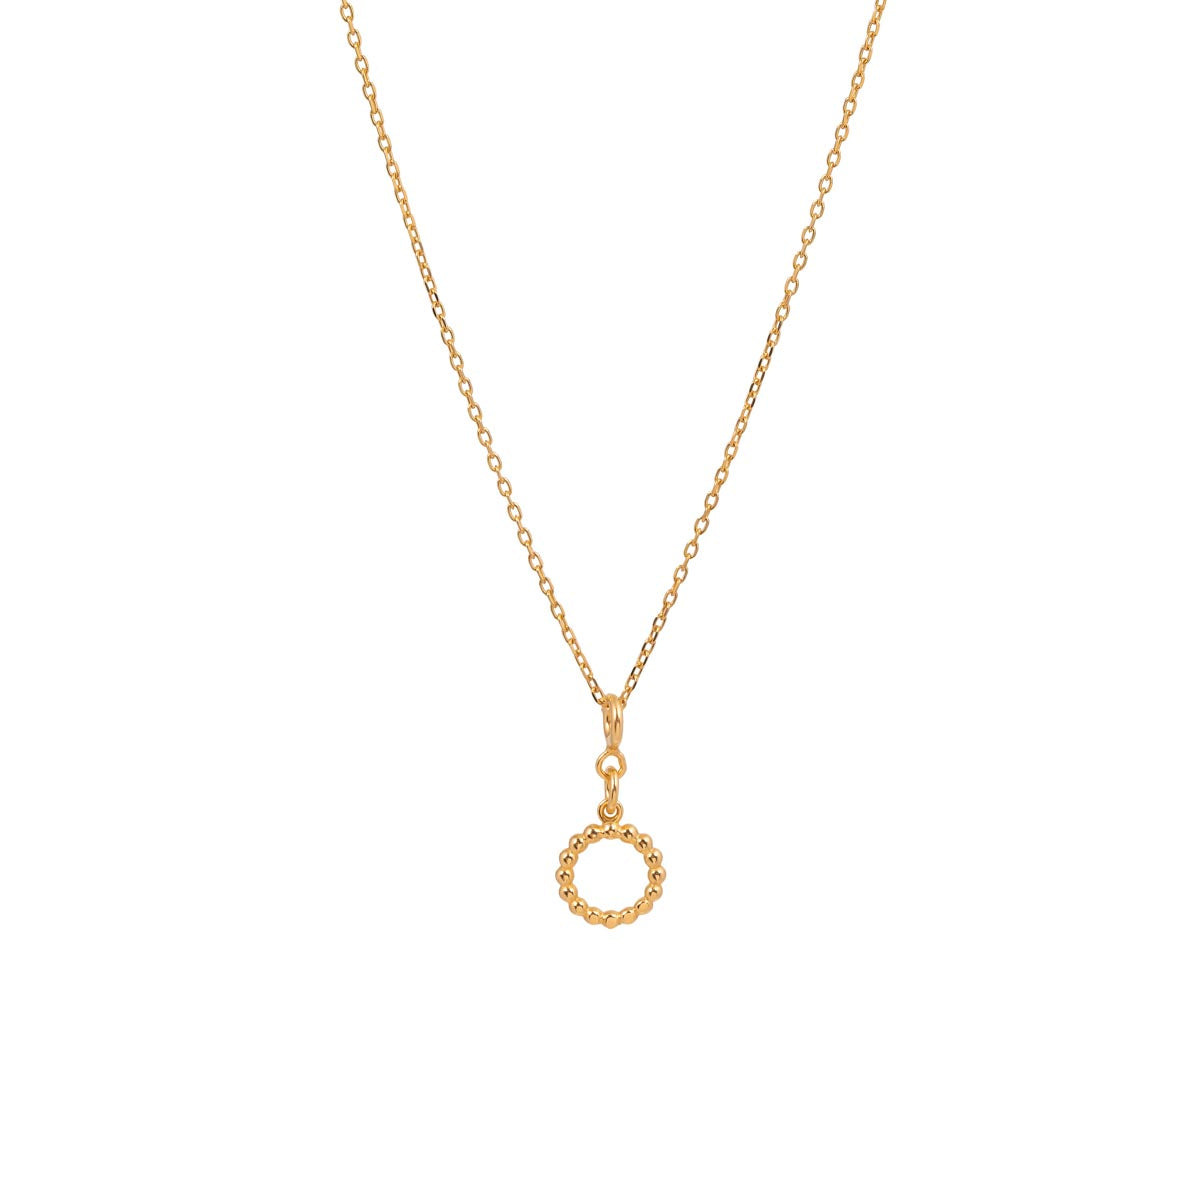 Yllätys Monogram Necklace O, gold-plated silver